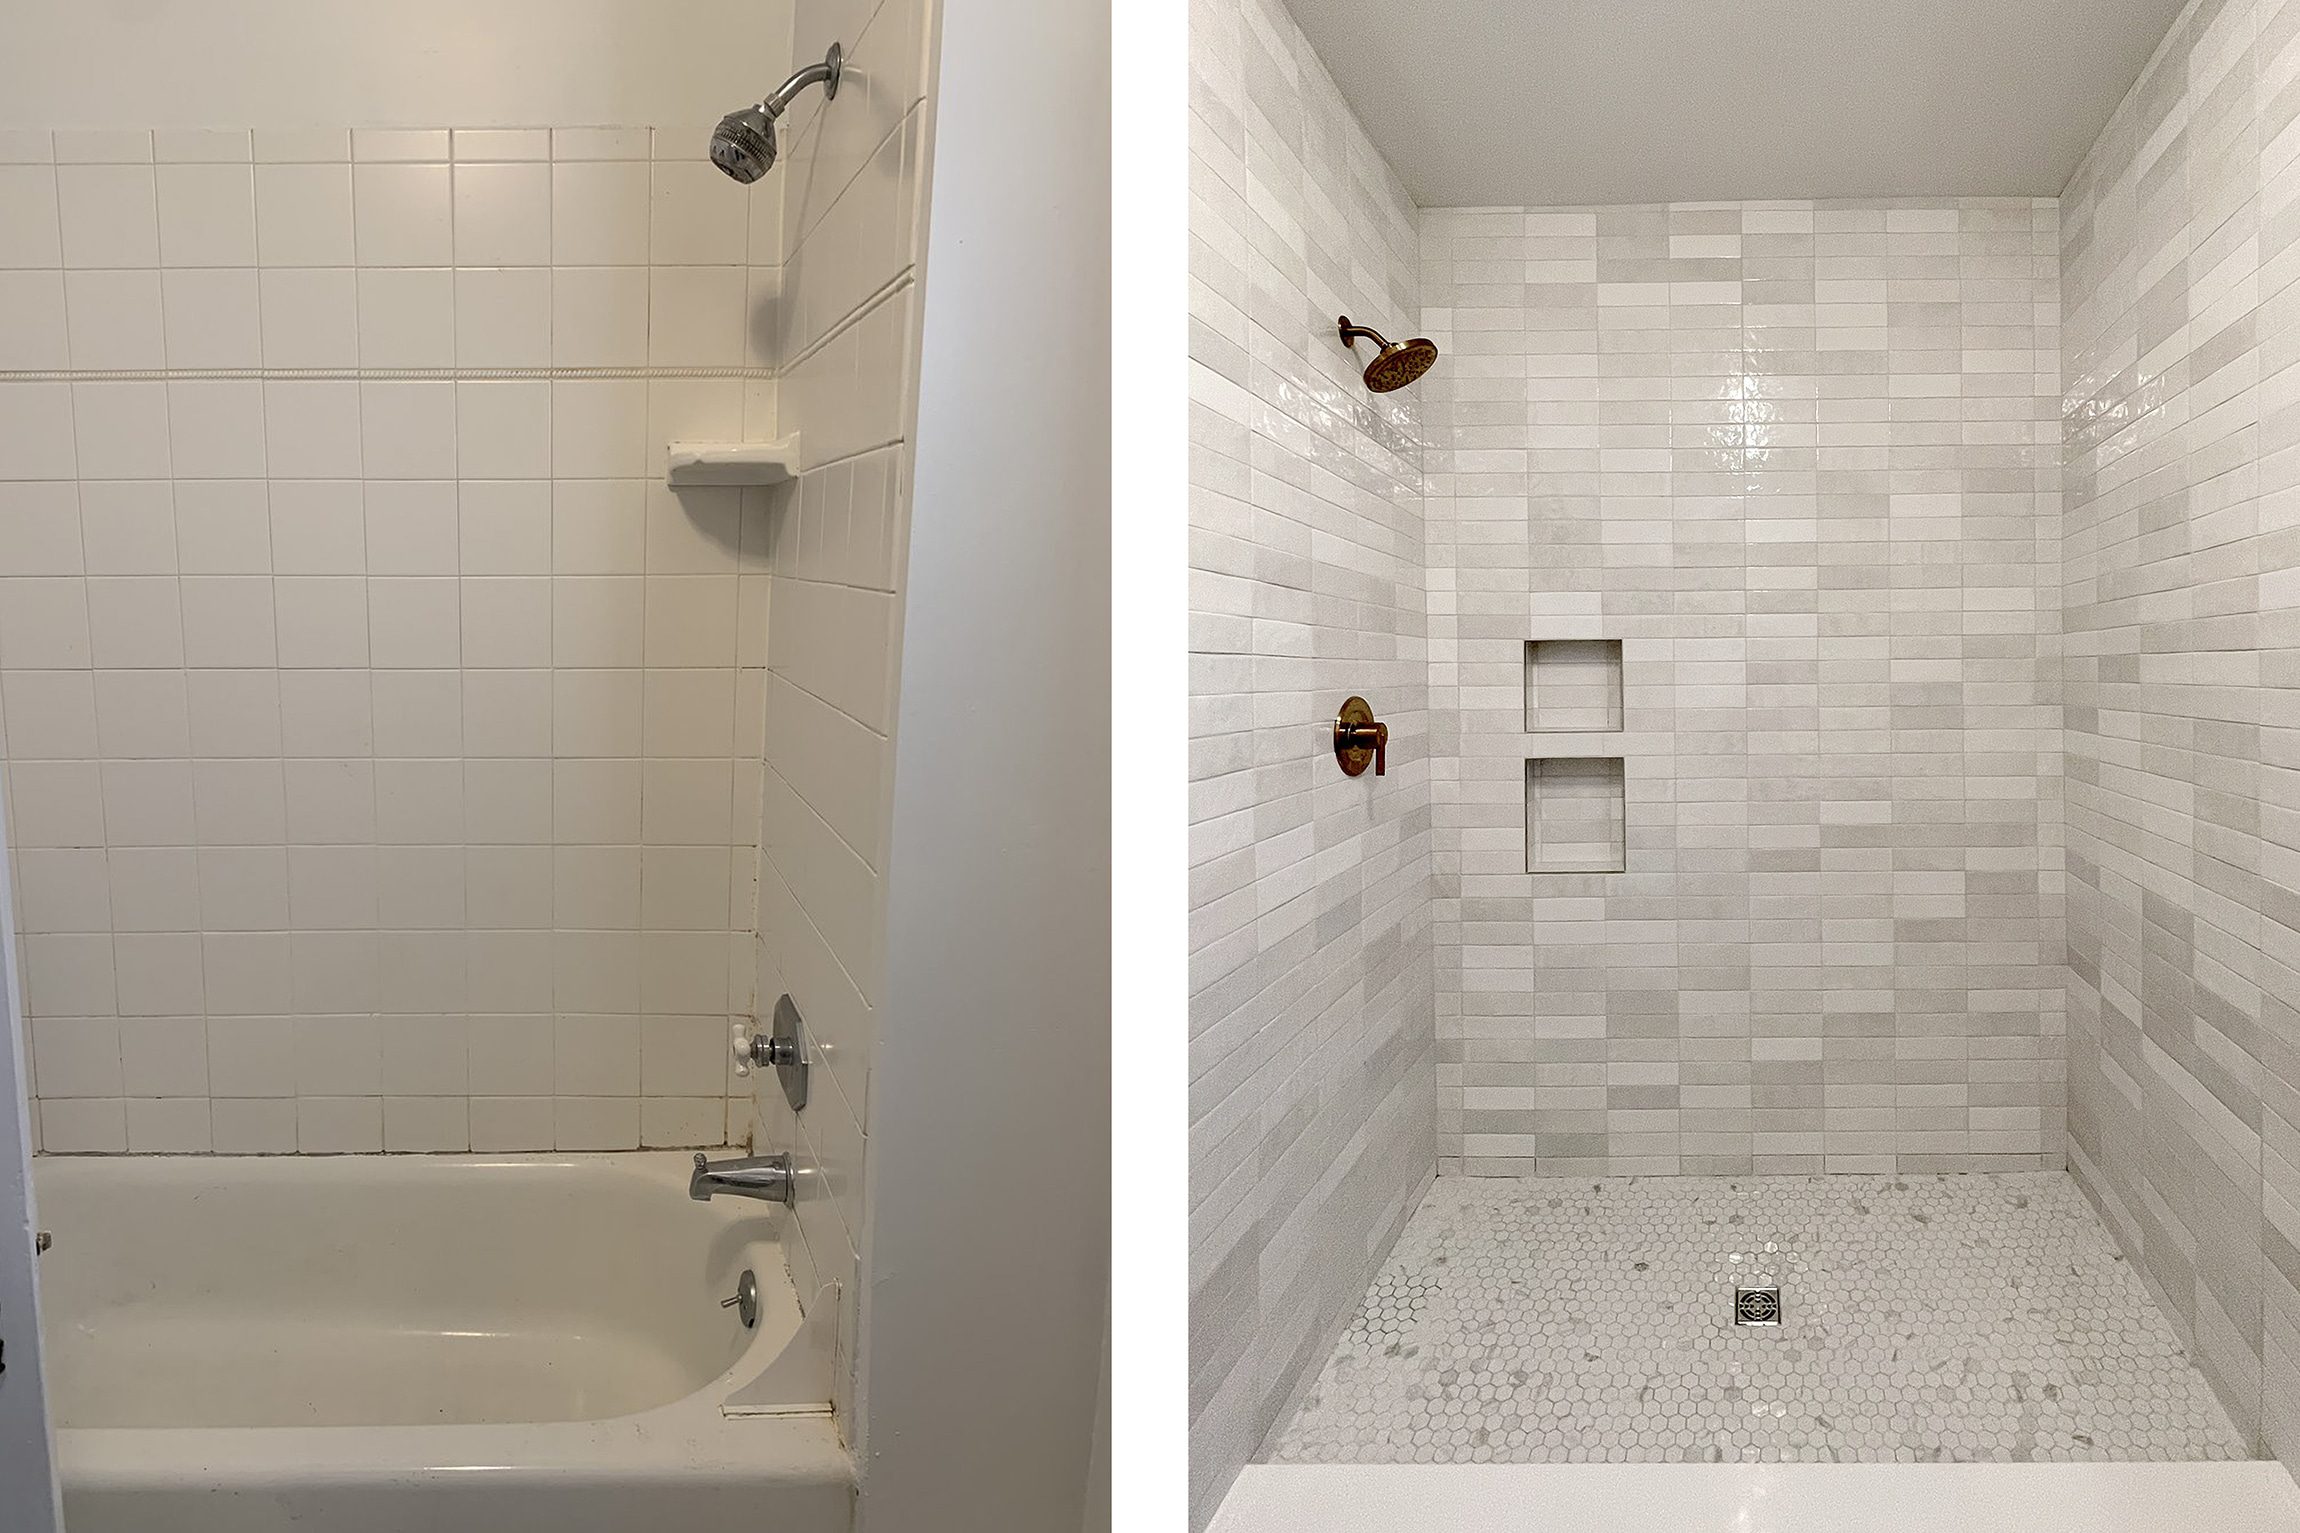 Before and after bathroom makeover by Little Chicago Two Flat | What Is 'Home Hacking'? via Yellow Brick Home